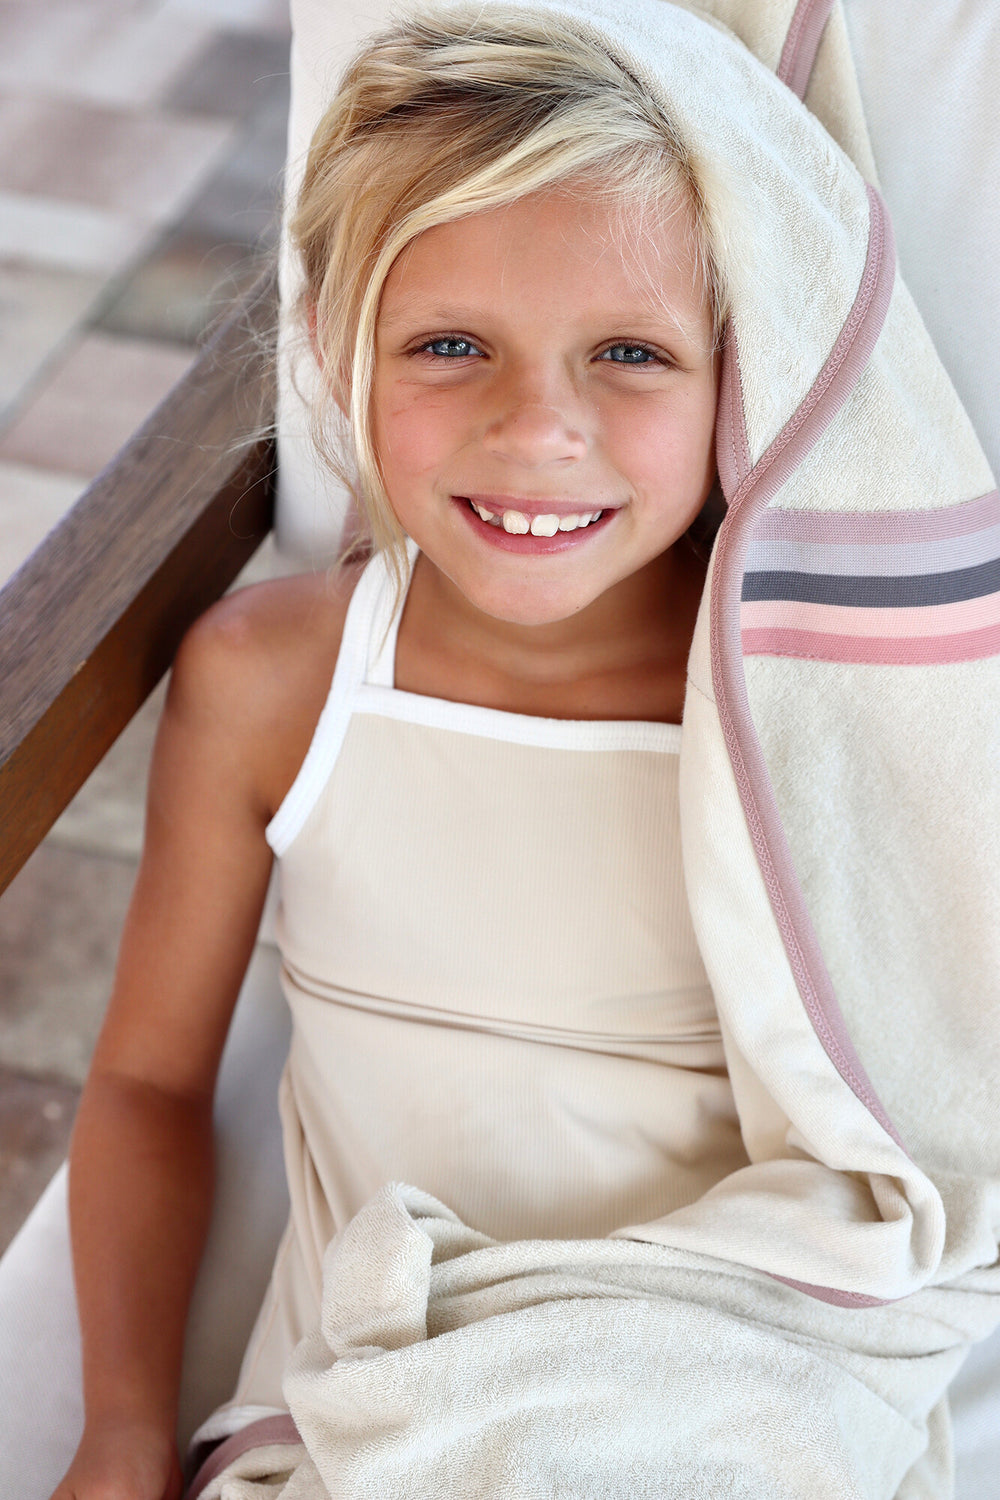 Child wearing Organic Terry Cloth Hooded Towel in Pinks.